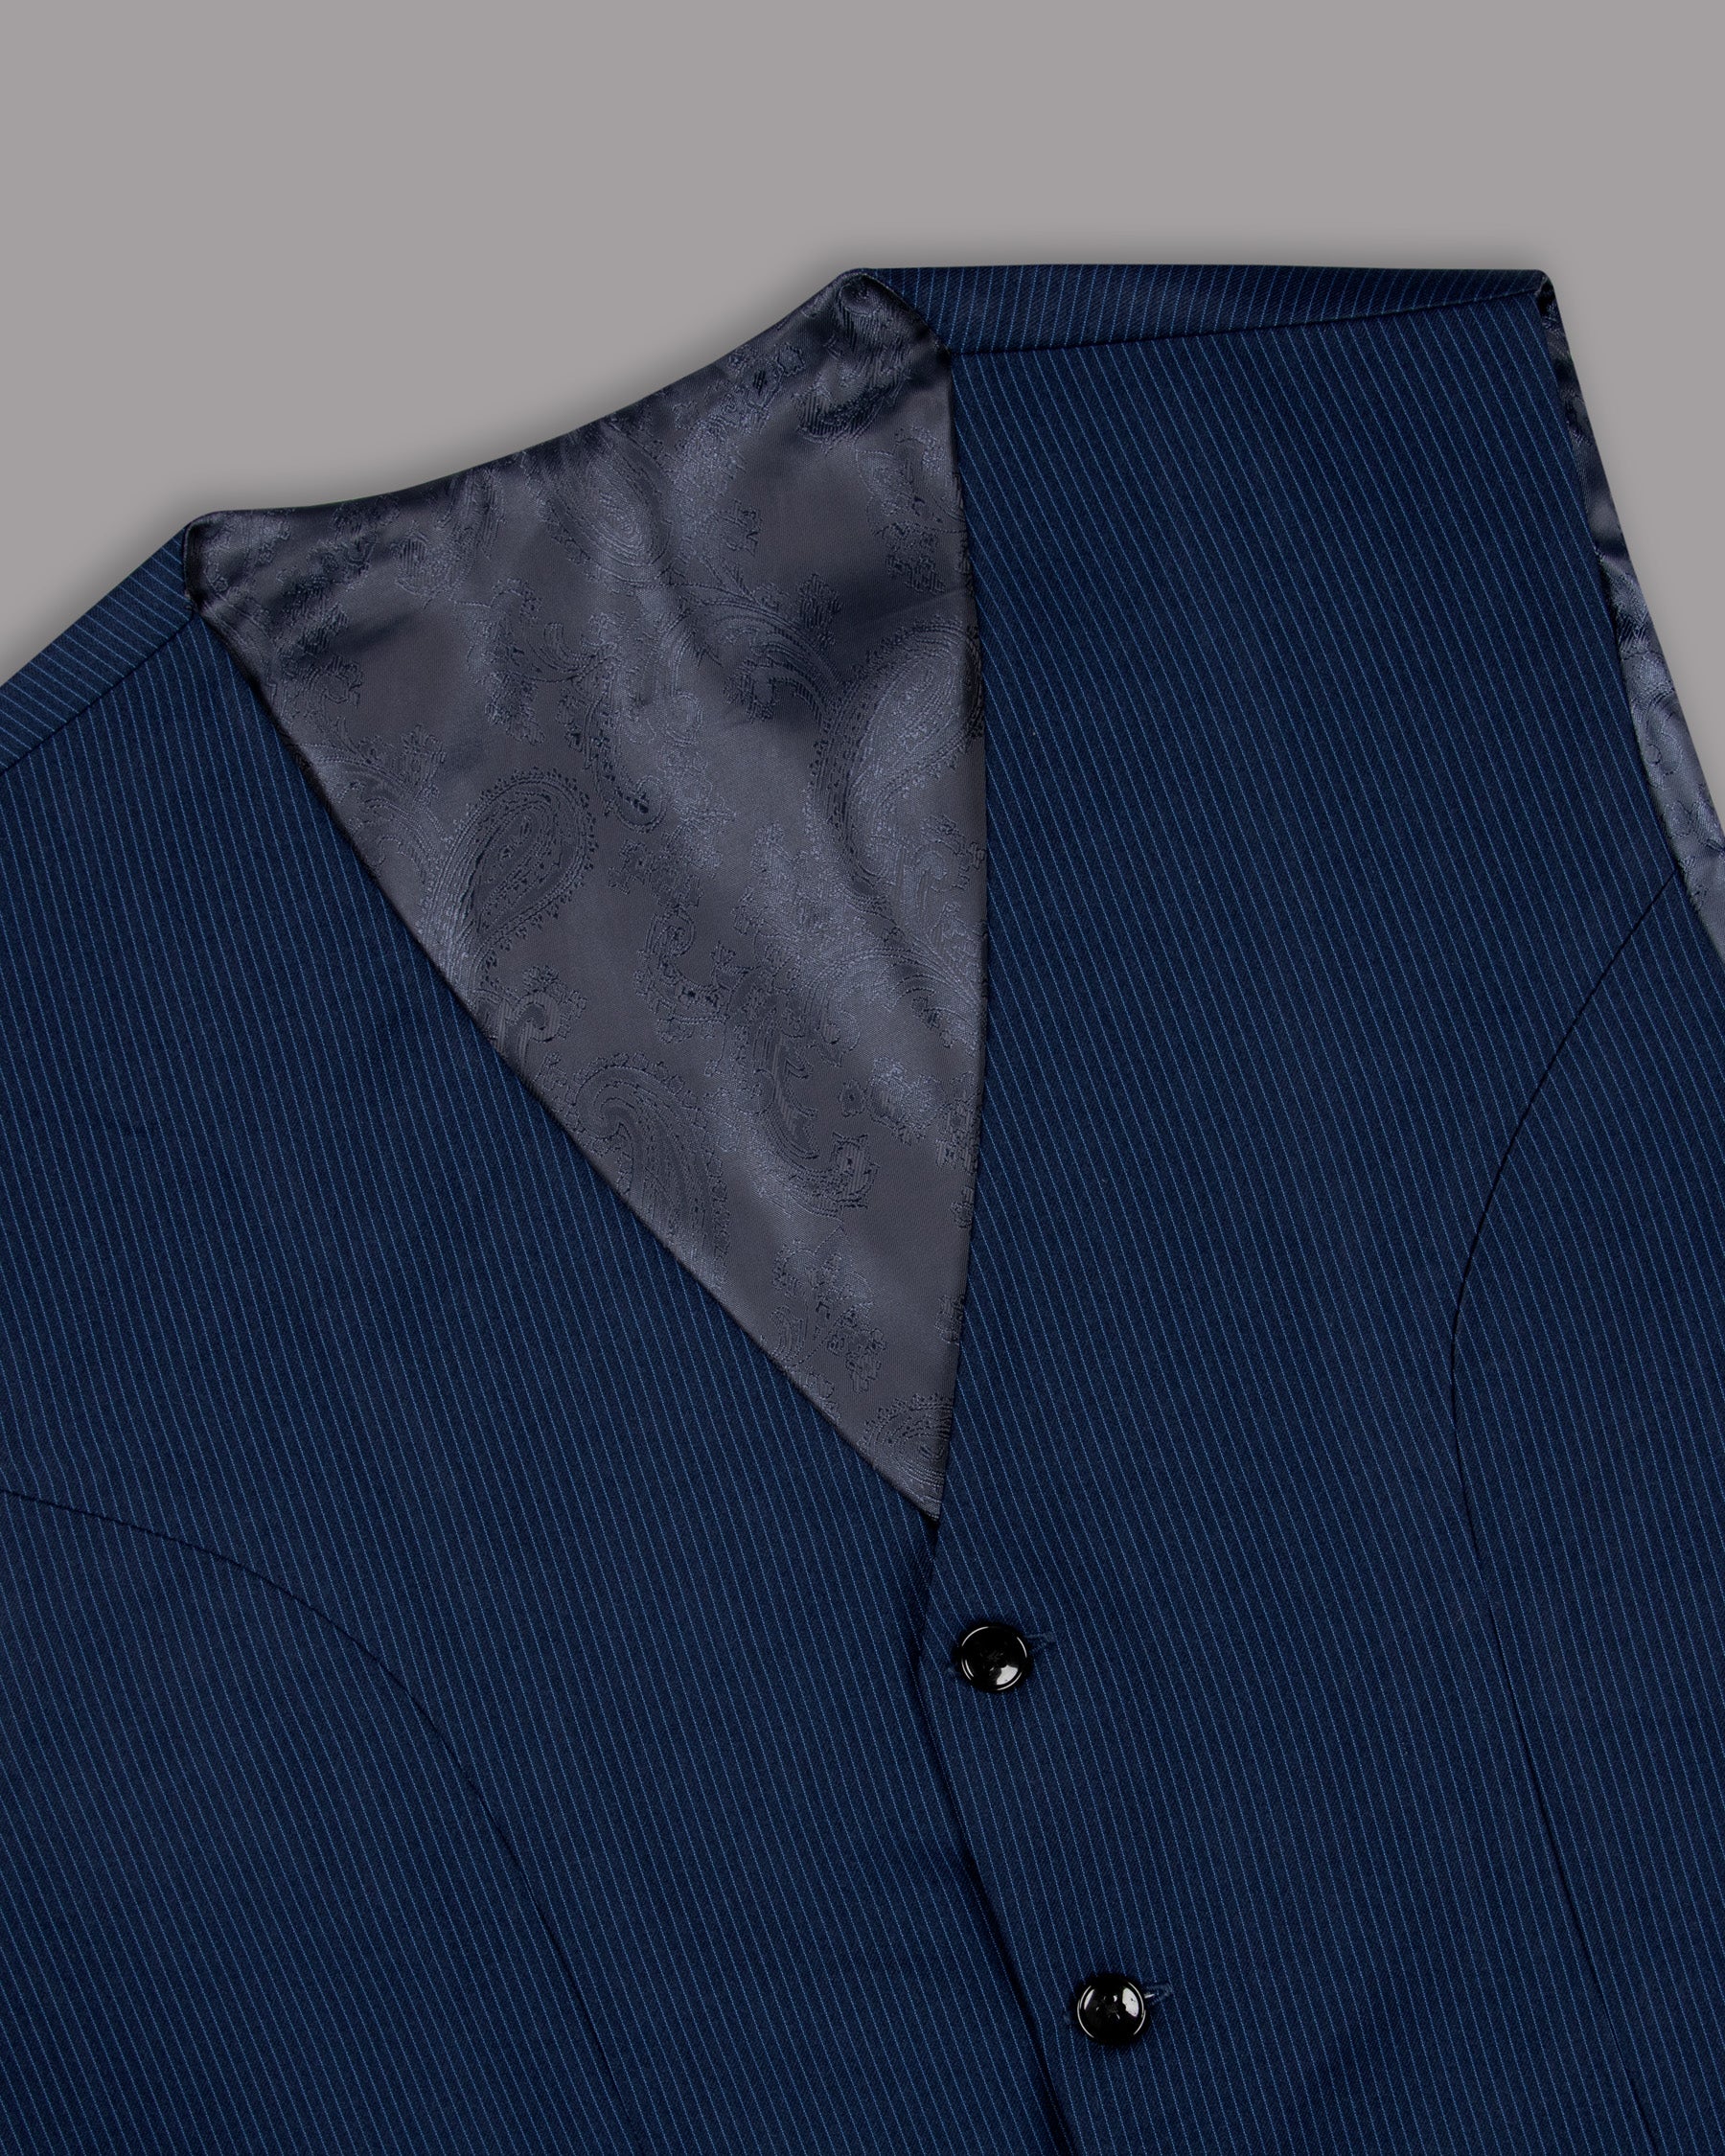 Midnight and Chambray blue Striped Woolrich Waistcoat